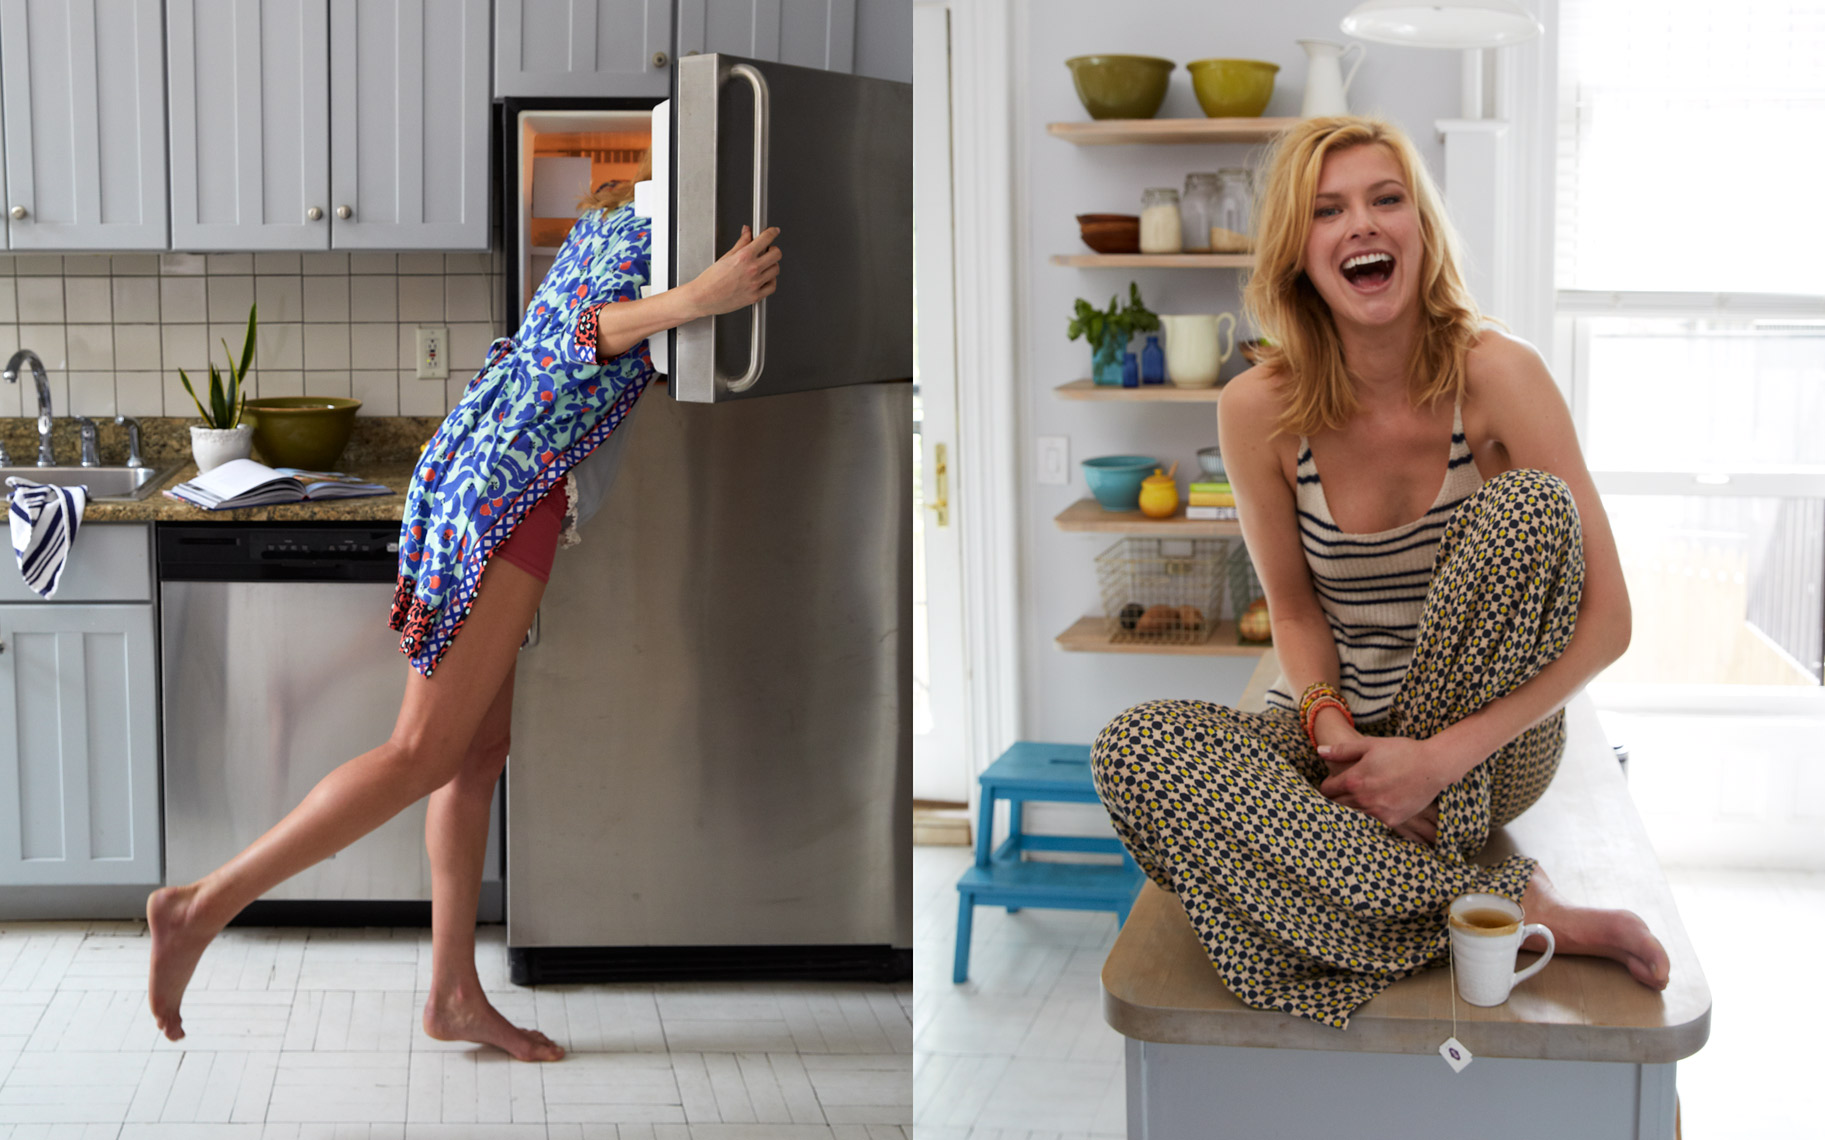 Humorous image of a woman in a robe leaning almost all the way into a fridge in a clean modern kitchen. Second image of a female model sitting on top of a kitchen counter laughing and holding a coffee cup.